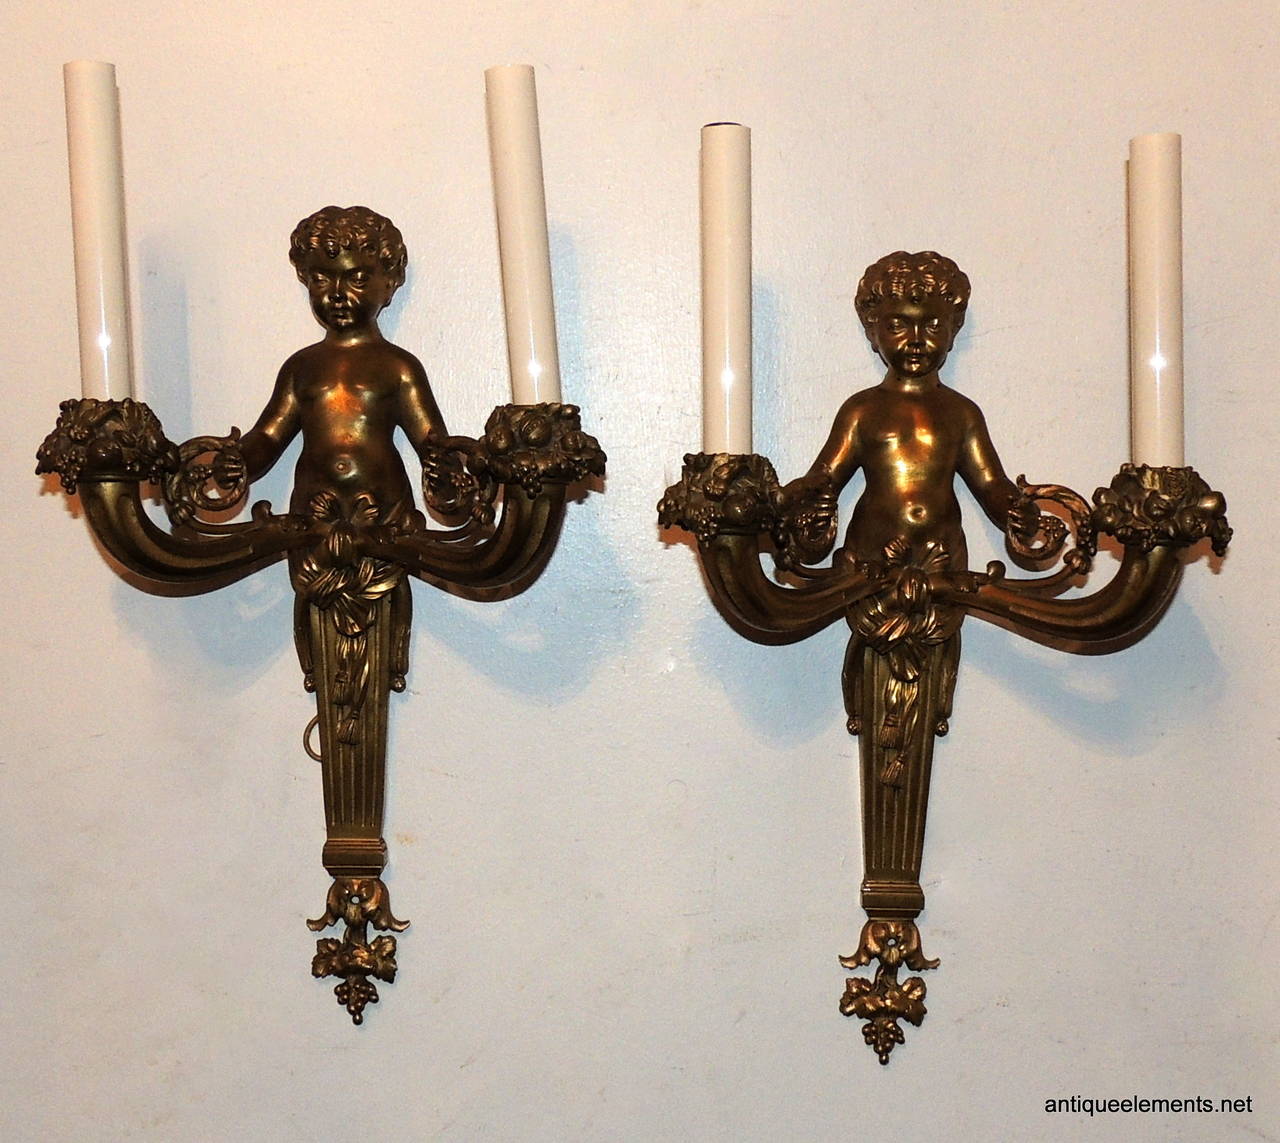 These wonderful French Doré bronze cherub two-arm sconces are full of detail. The bobeches are covered in floral and fruit draping and repeated at the end of the sconces. The bottom of the cherub has fabric draping and a bow that accents the center